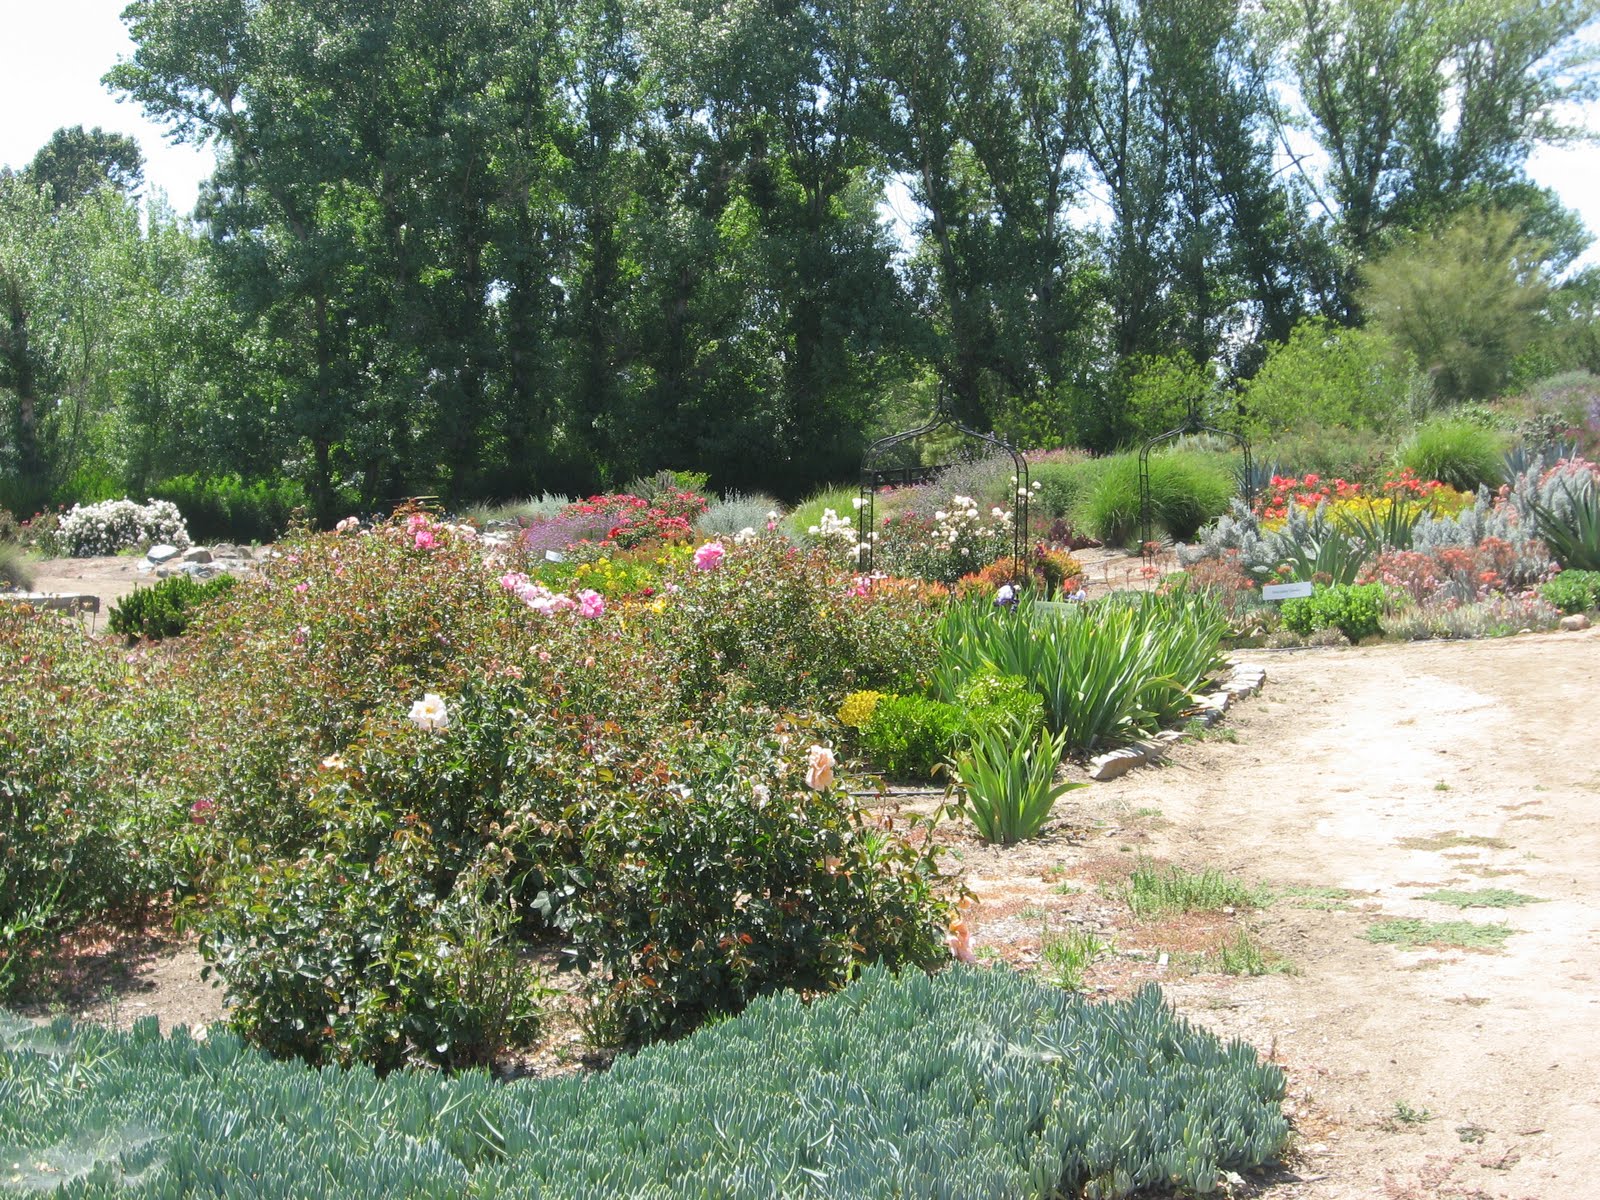 Daily Temecula: Off the Beaten Path: Temecula's Rose Haven Heritage Garden